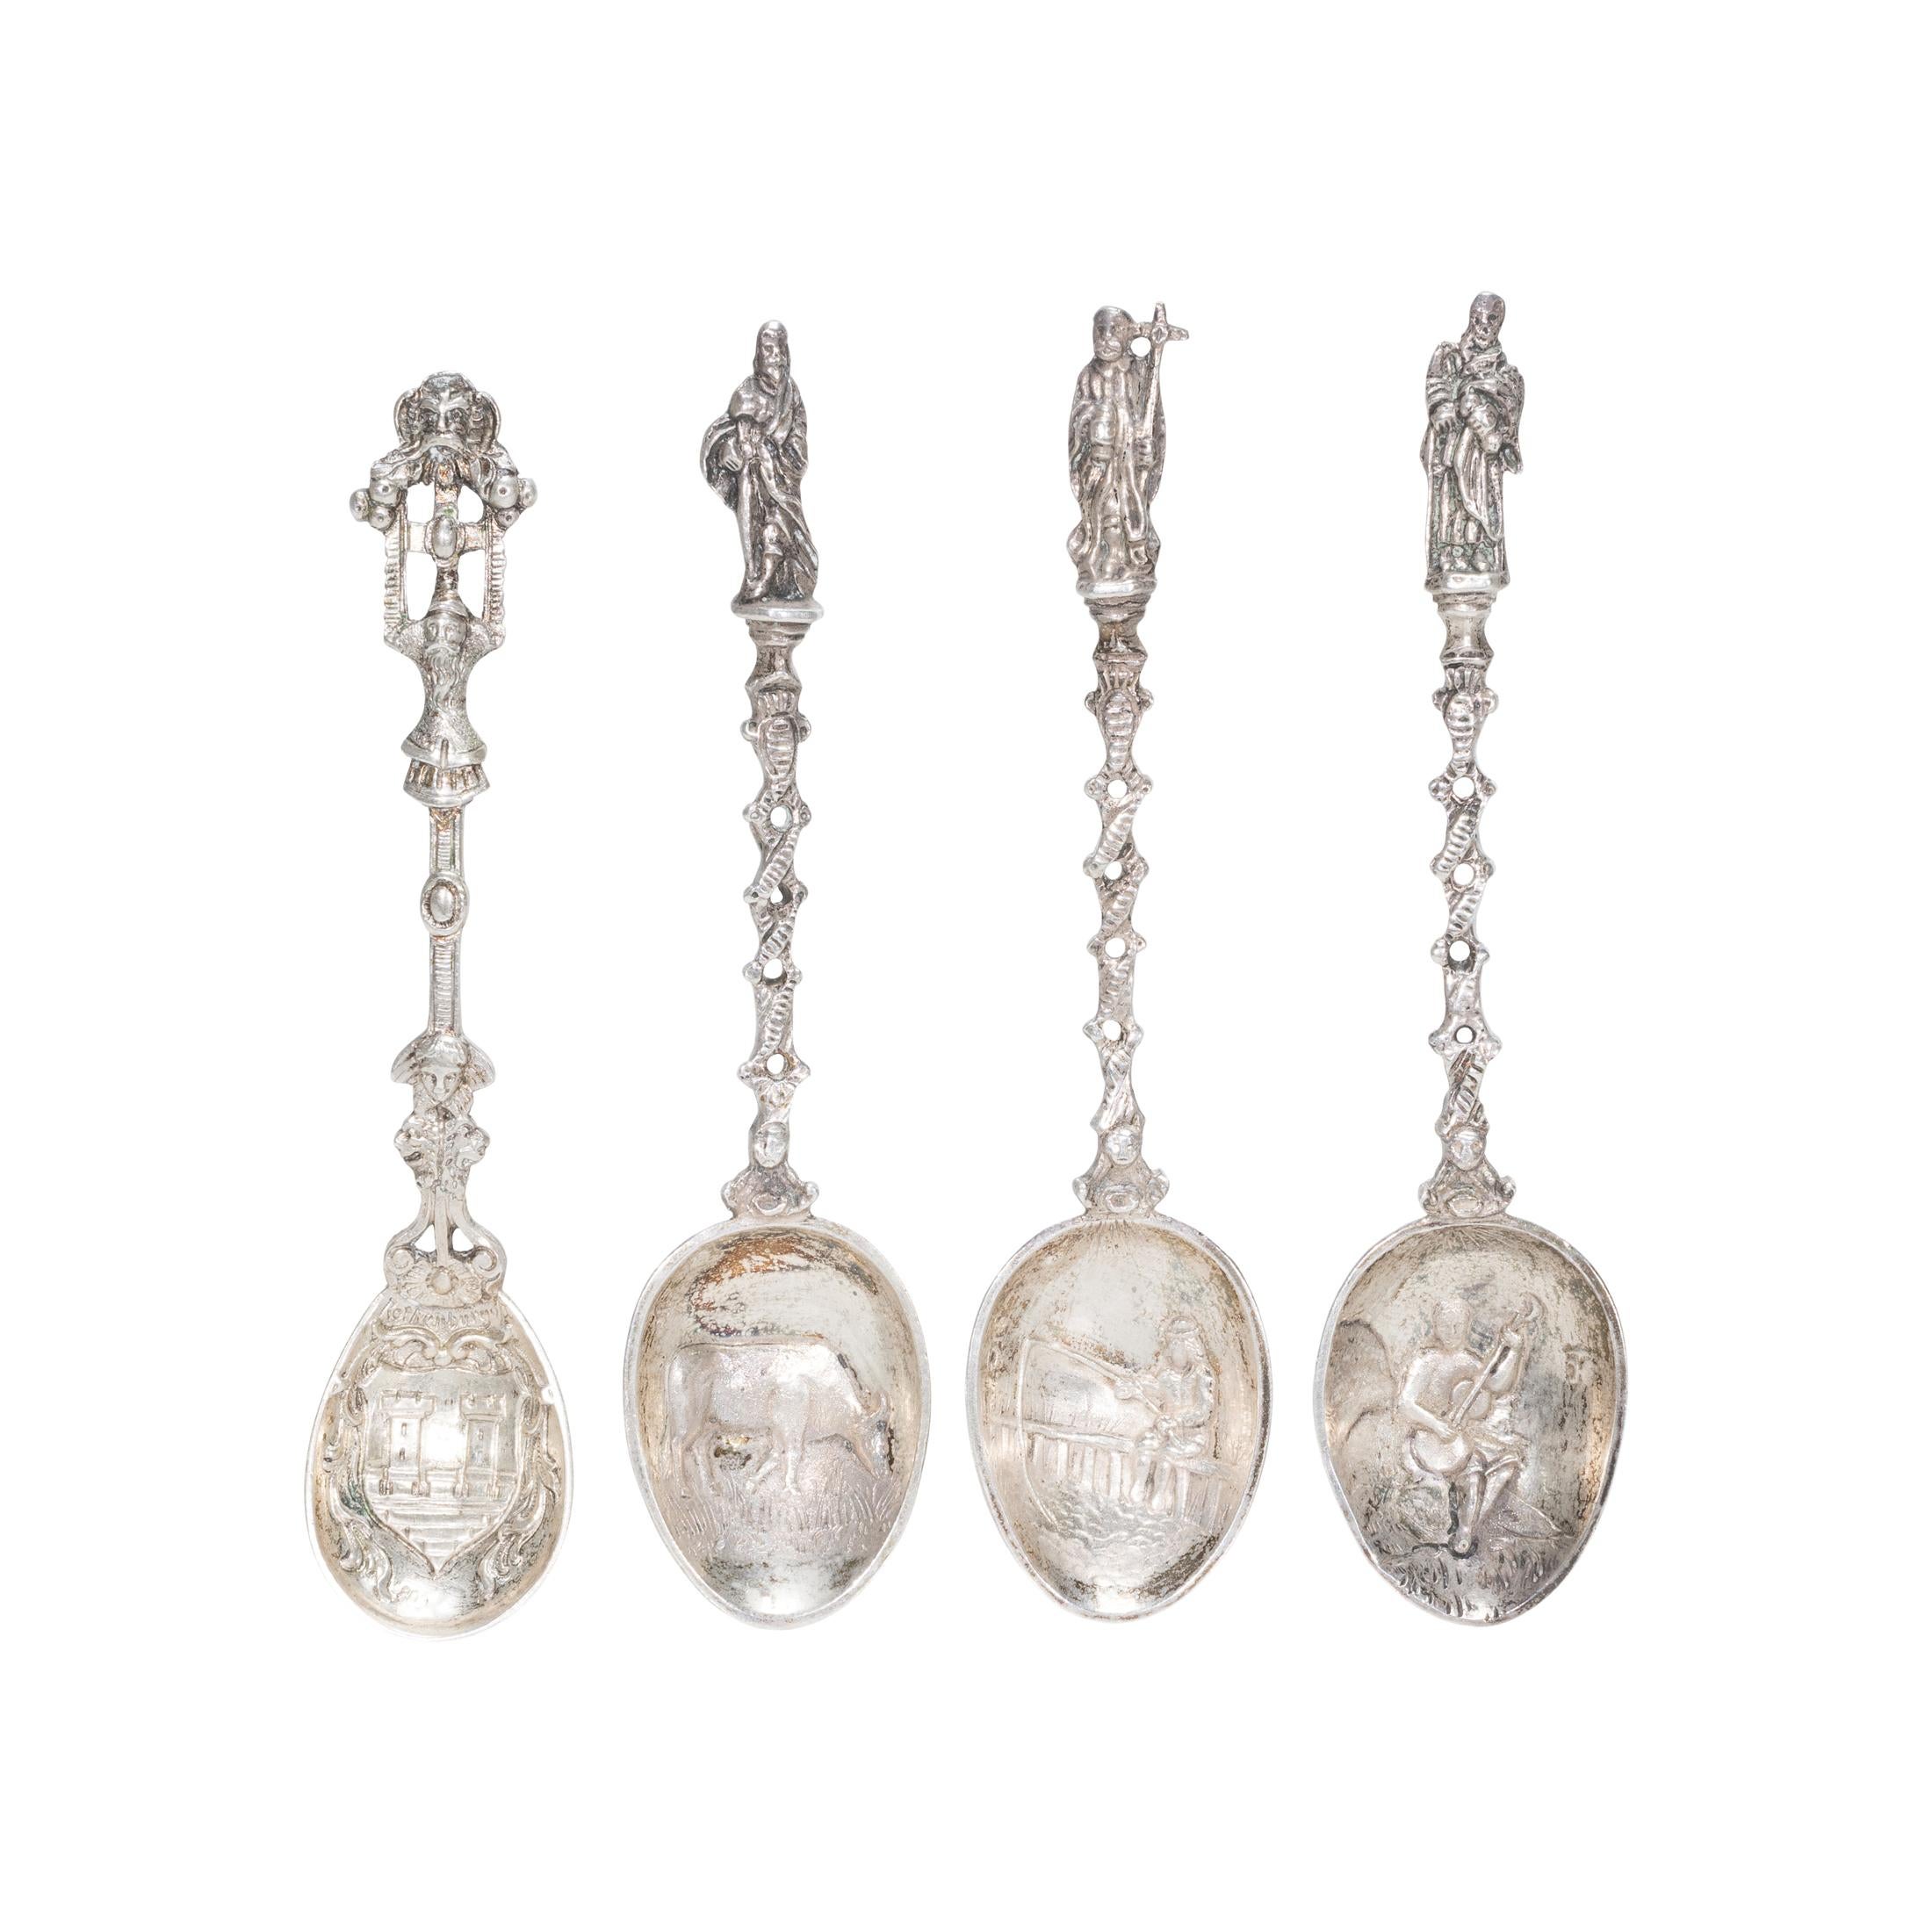 Set of 13 German 800 apostle spoons. One with Virgin Mary and baby. 17th to late 19th Century. An apostle spoon is a spoon with an image of an apostle or other saint as the termination of the handle, each bearing his distinctive emblem. Apostle